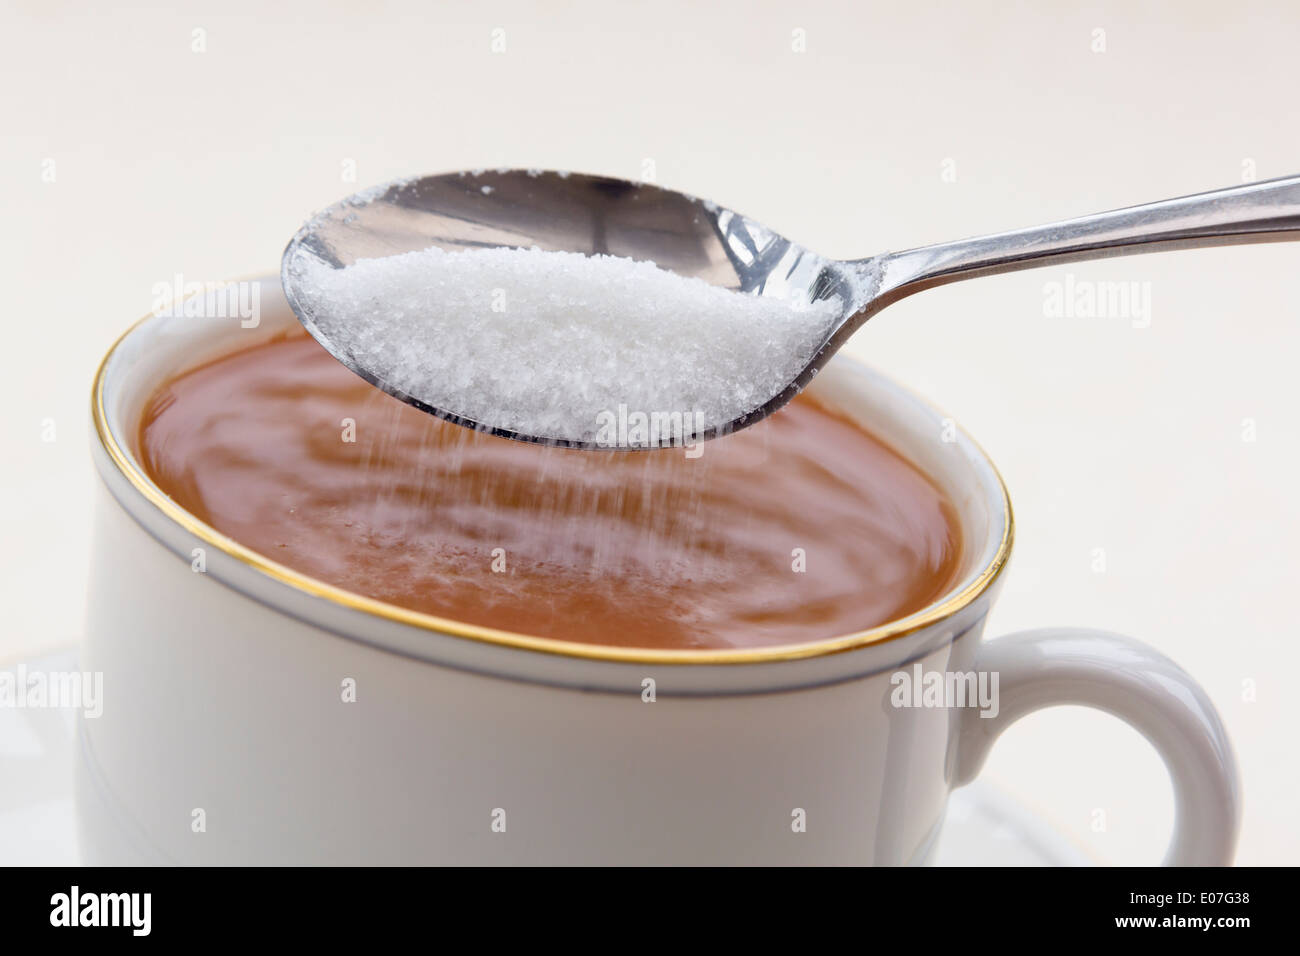 Adding a spoon of white granulated sugar into a cup of tea in a teacup can contribute to diabetes and extra calories weight gain. England UK Stock Photo